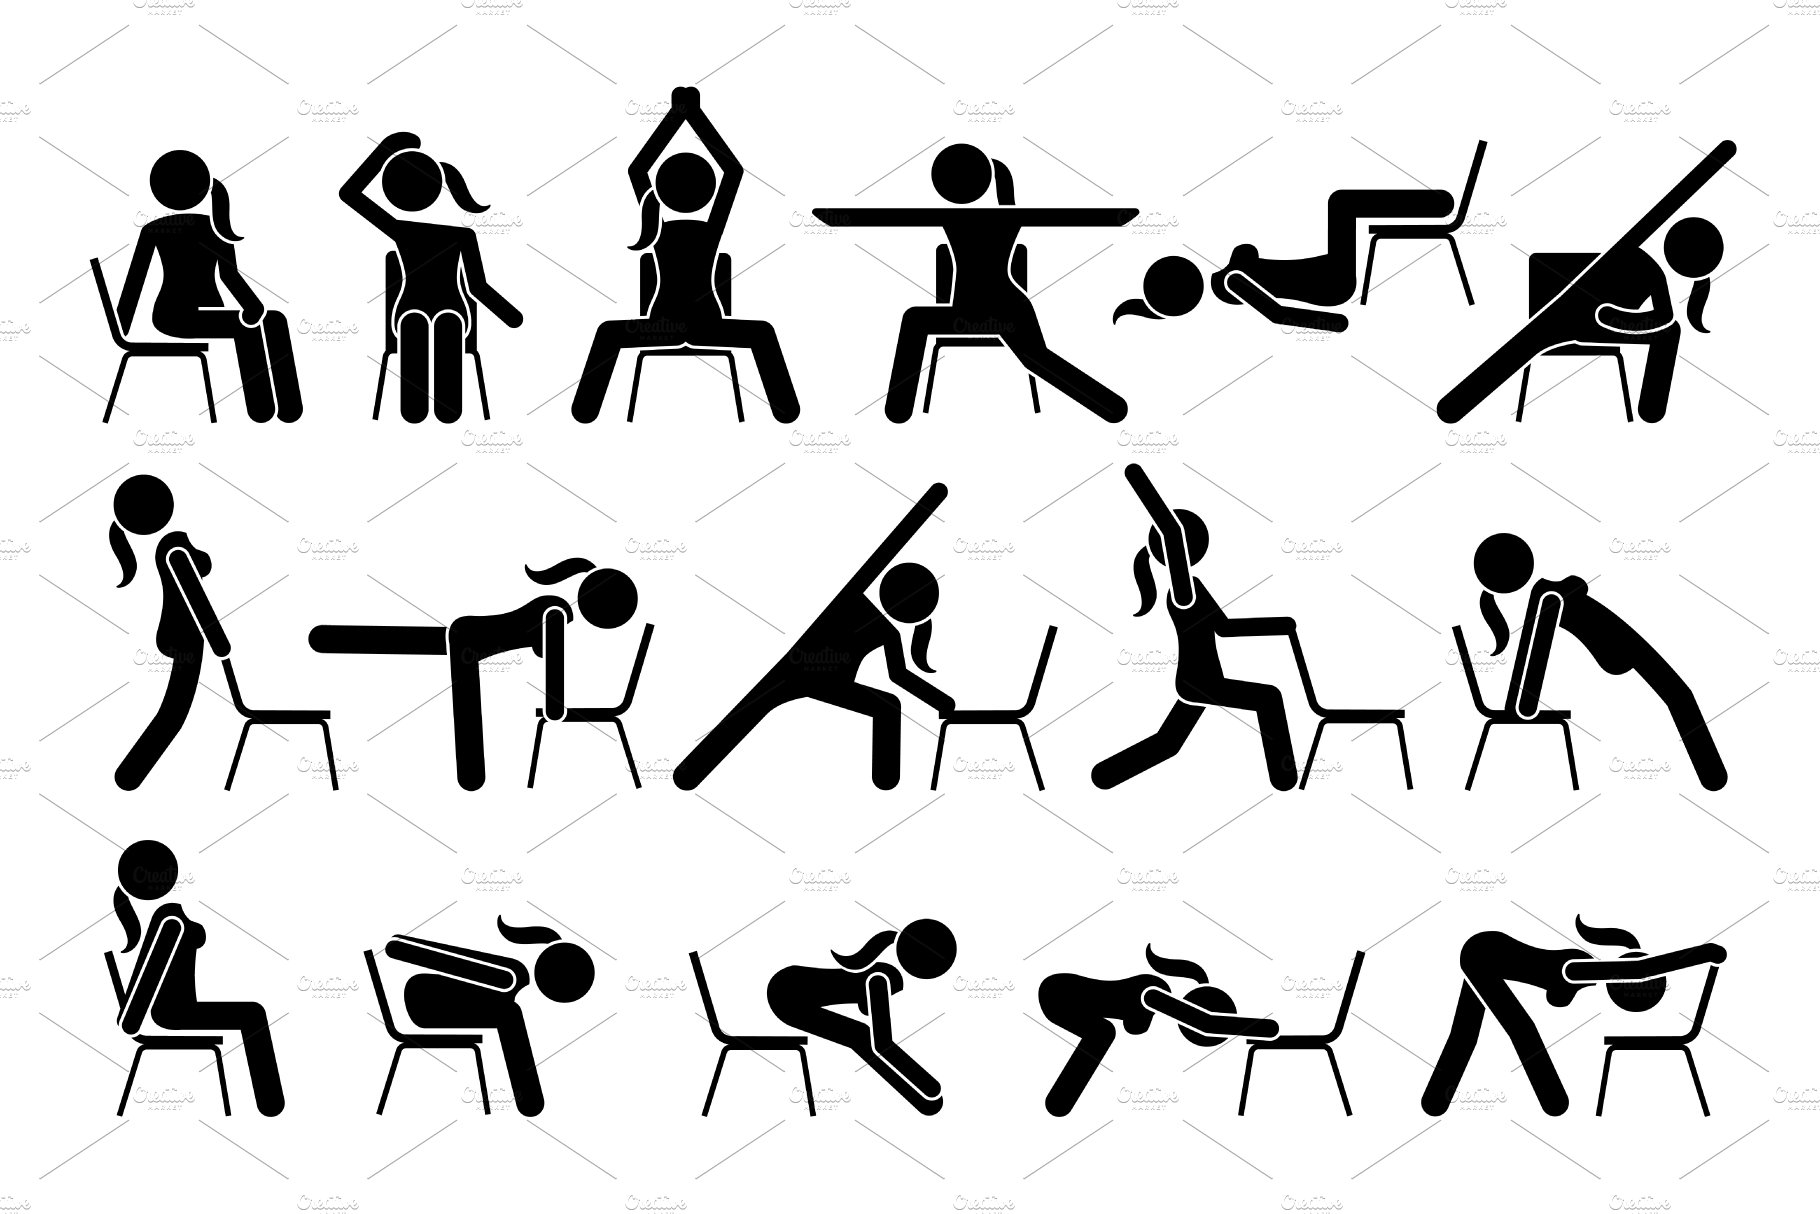 Chair Yoga Exercises Postures cover image.